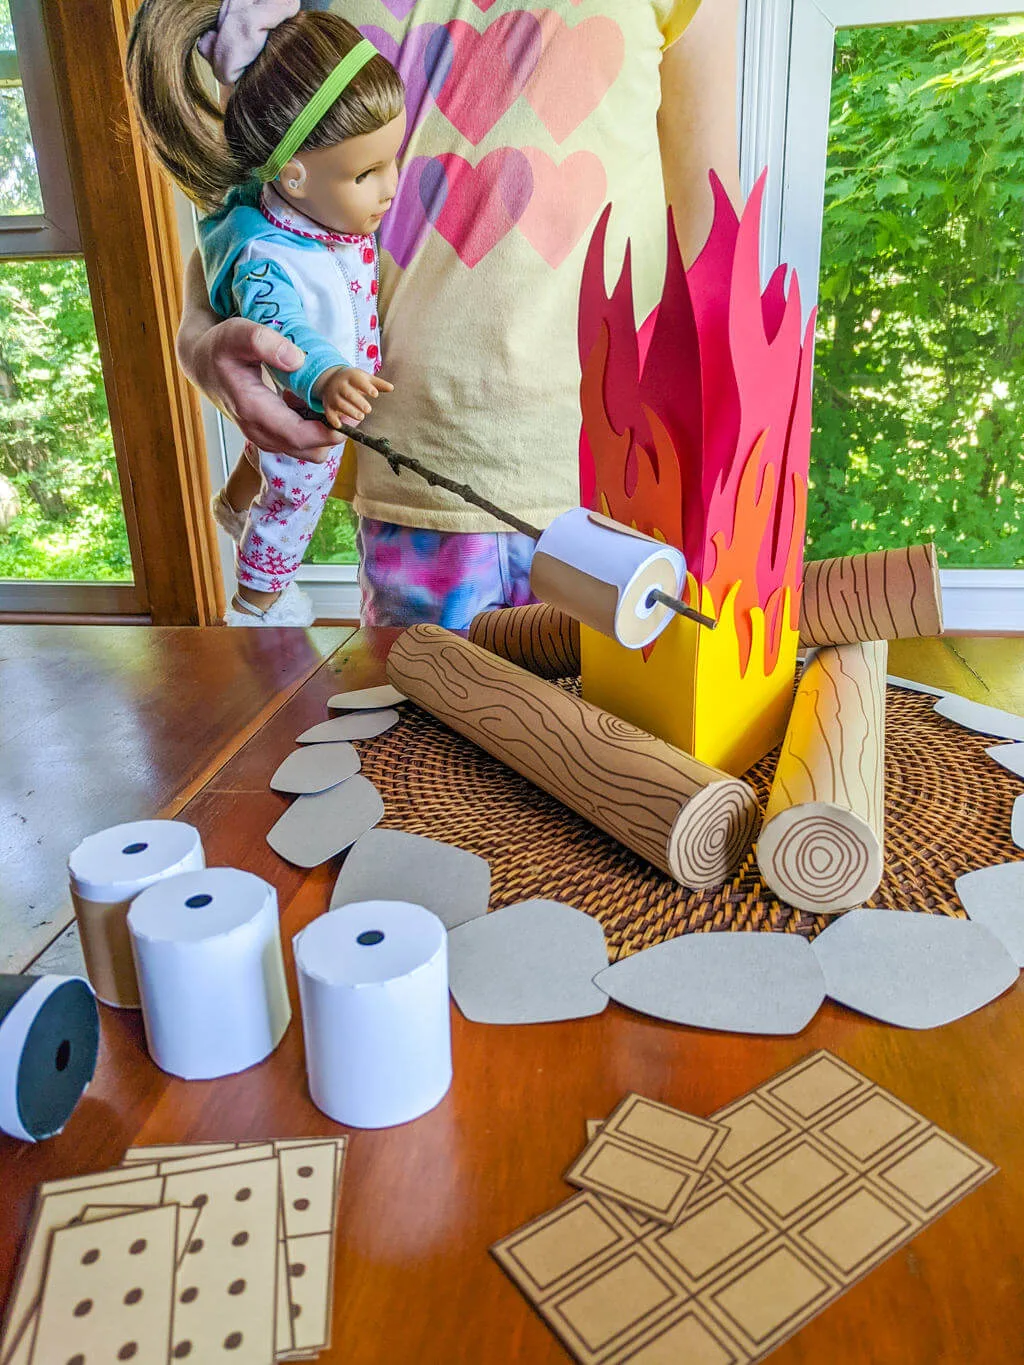 American Girl doll playing with paper campfire and s'mores pretend play set